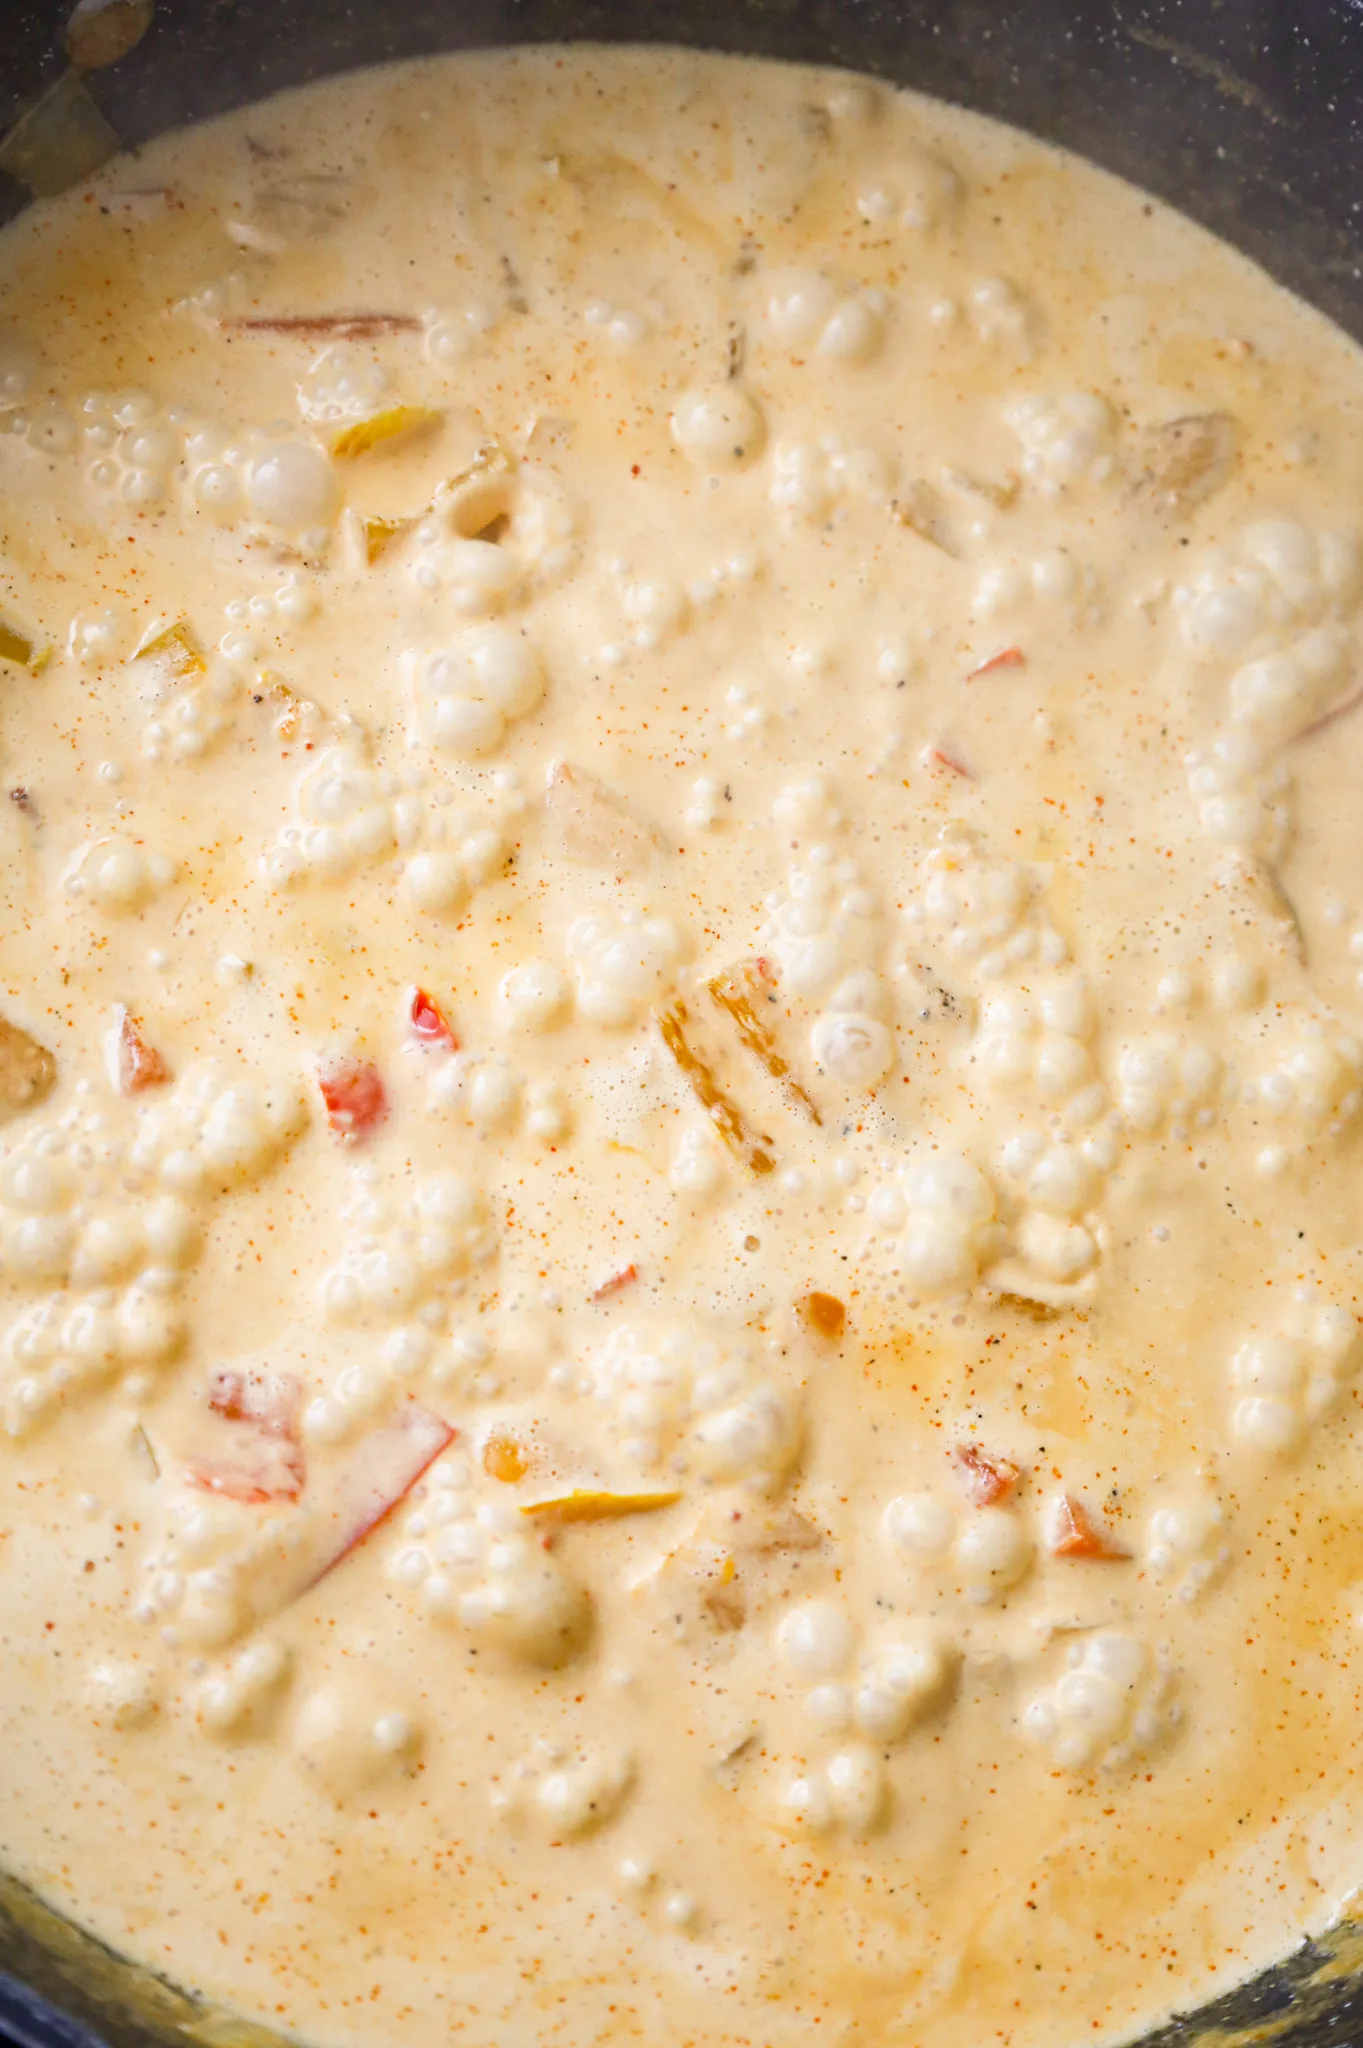 creamy chipotle sauce boiling in a skillet